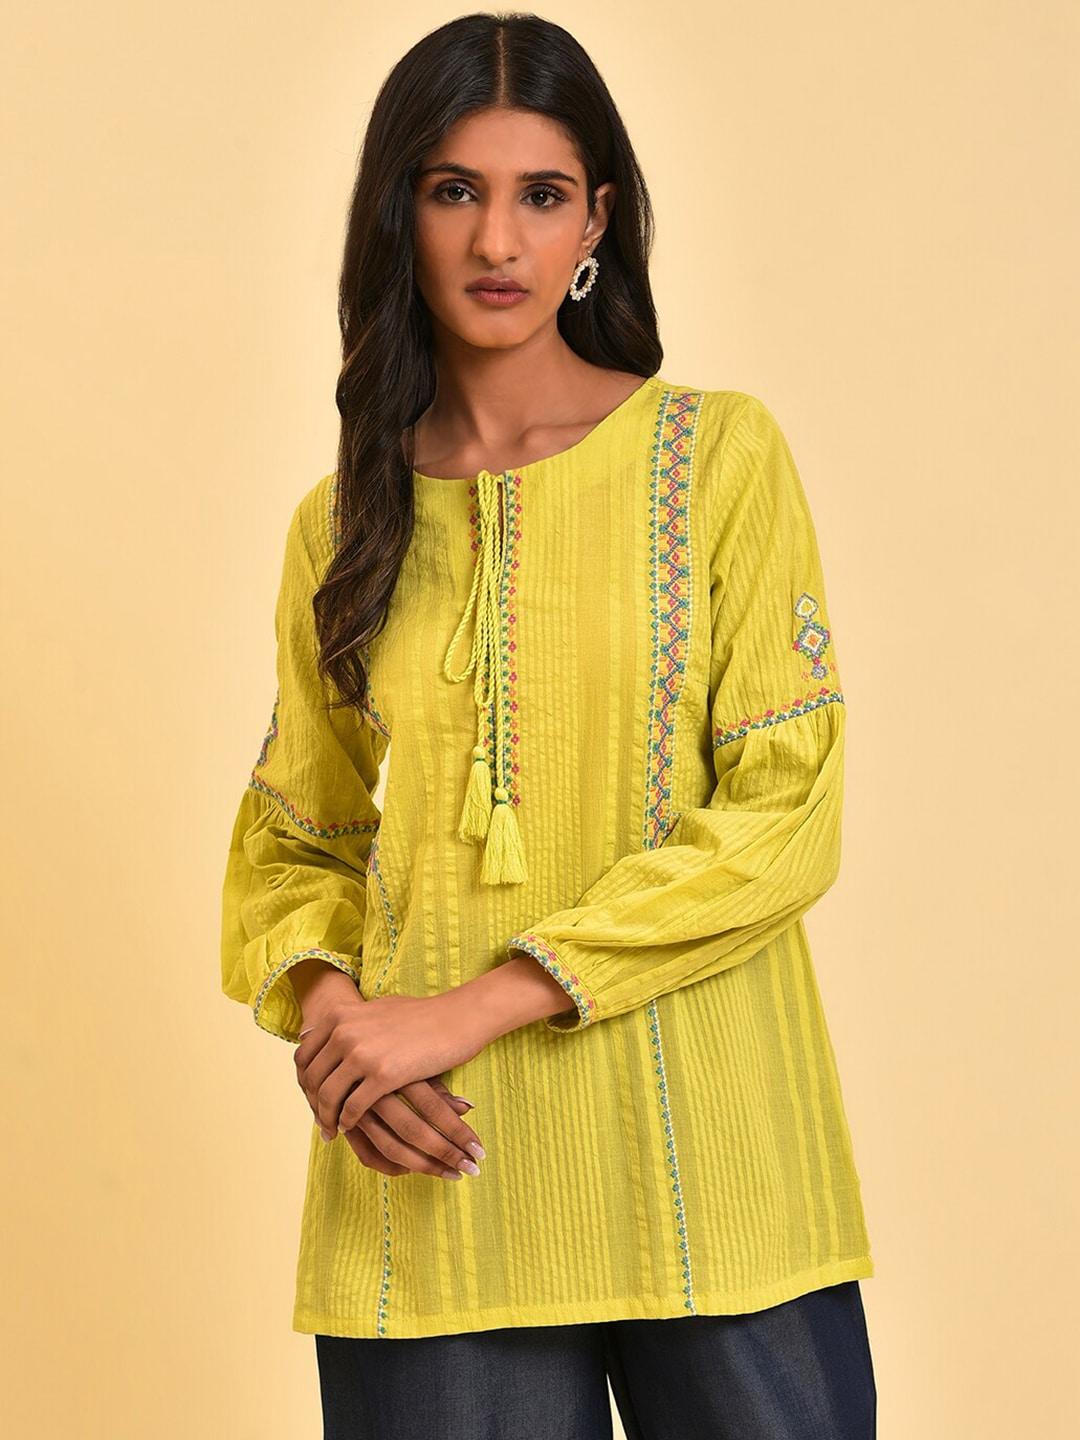 W Yellow Self Designed Ethnic Motifs Embroidered Tie-Up Neck Cotton Top